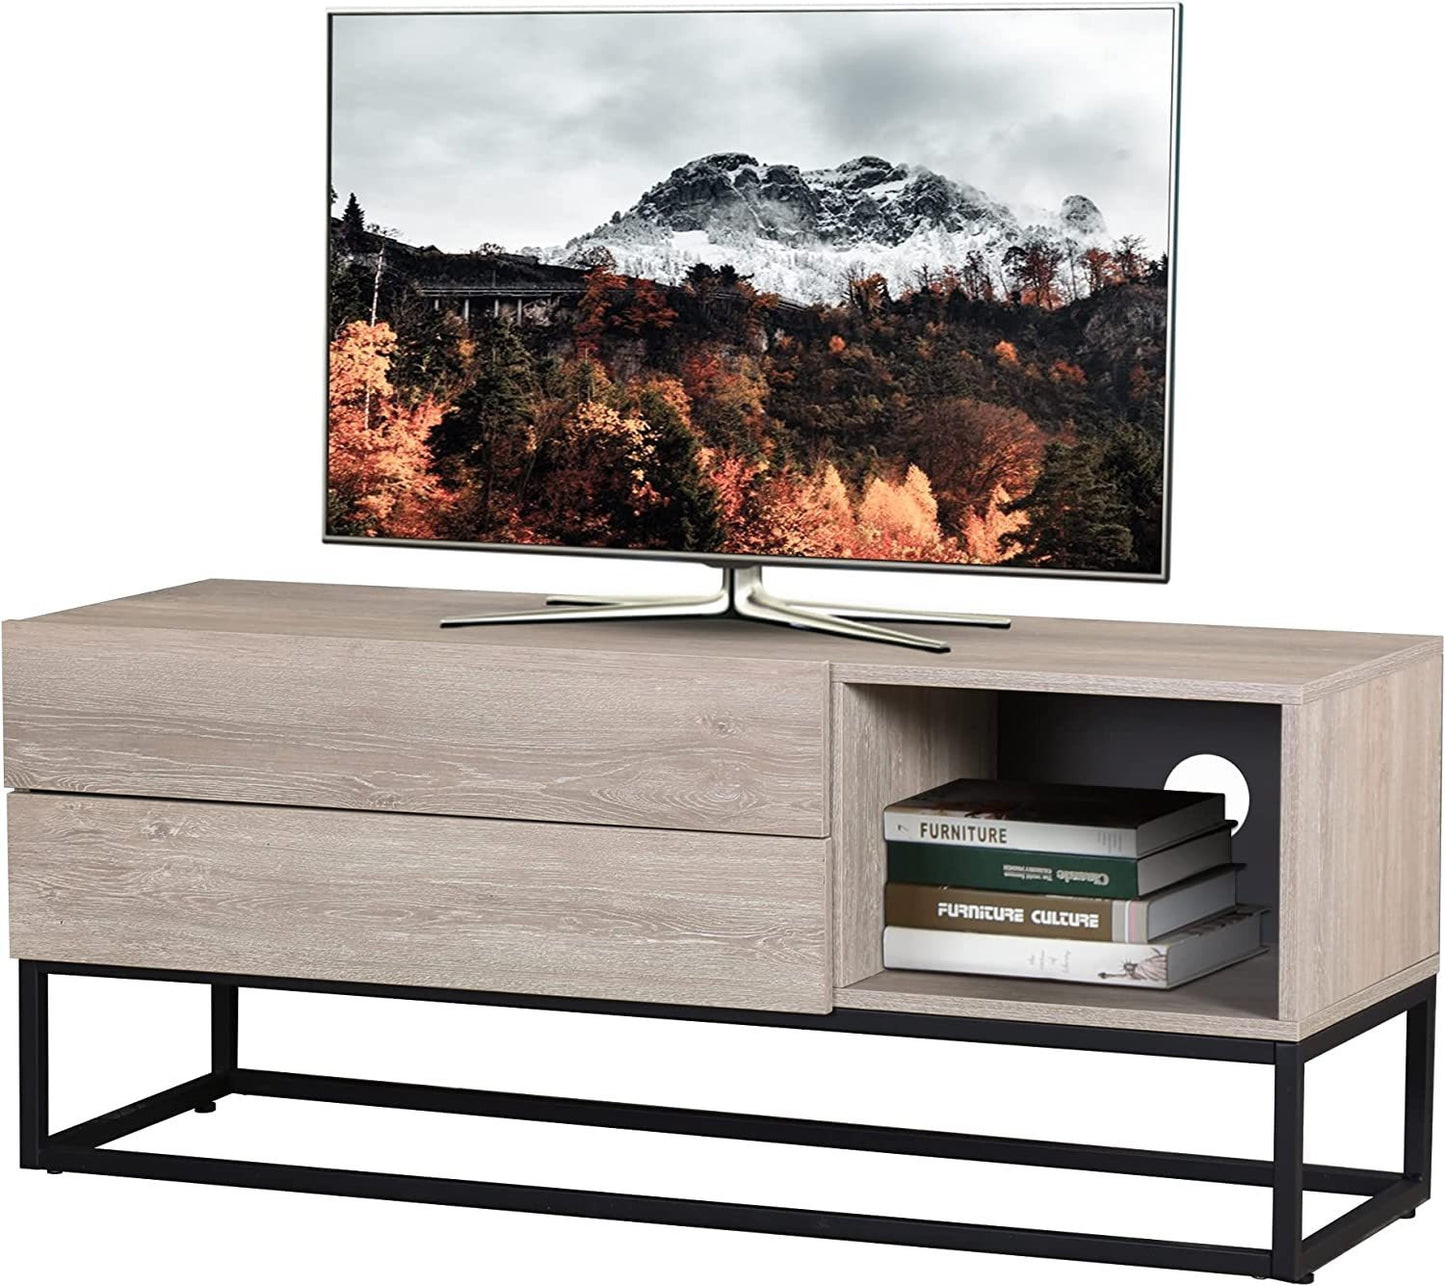 Entertainment Center with Storage, Modern TV Stand Media Cnsole for TV up to 50 inch for Living Room Bedroom